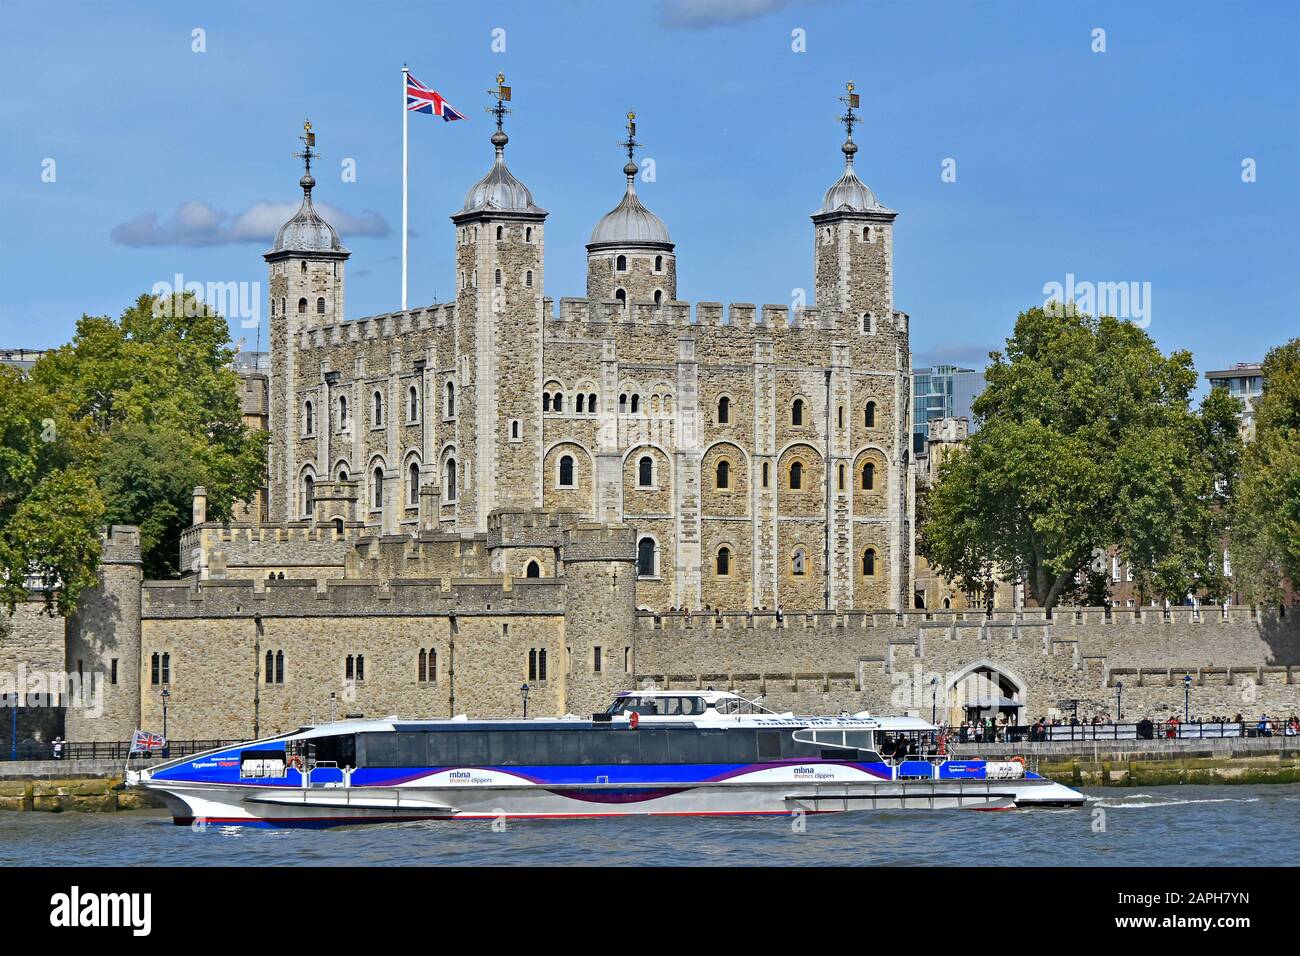 Close up of Thames clipper catamaran river bus boat on famous waterway passing historical riverside White Tower in Tower of London castle England UK Stock Photo